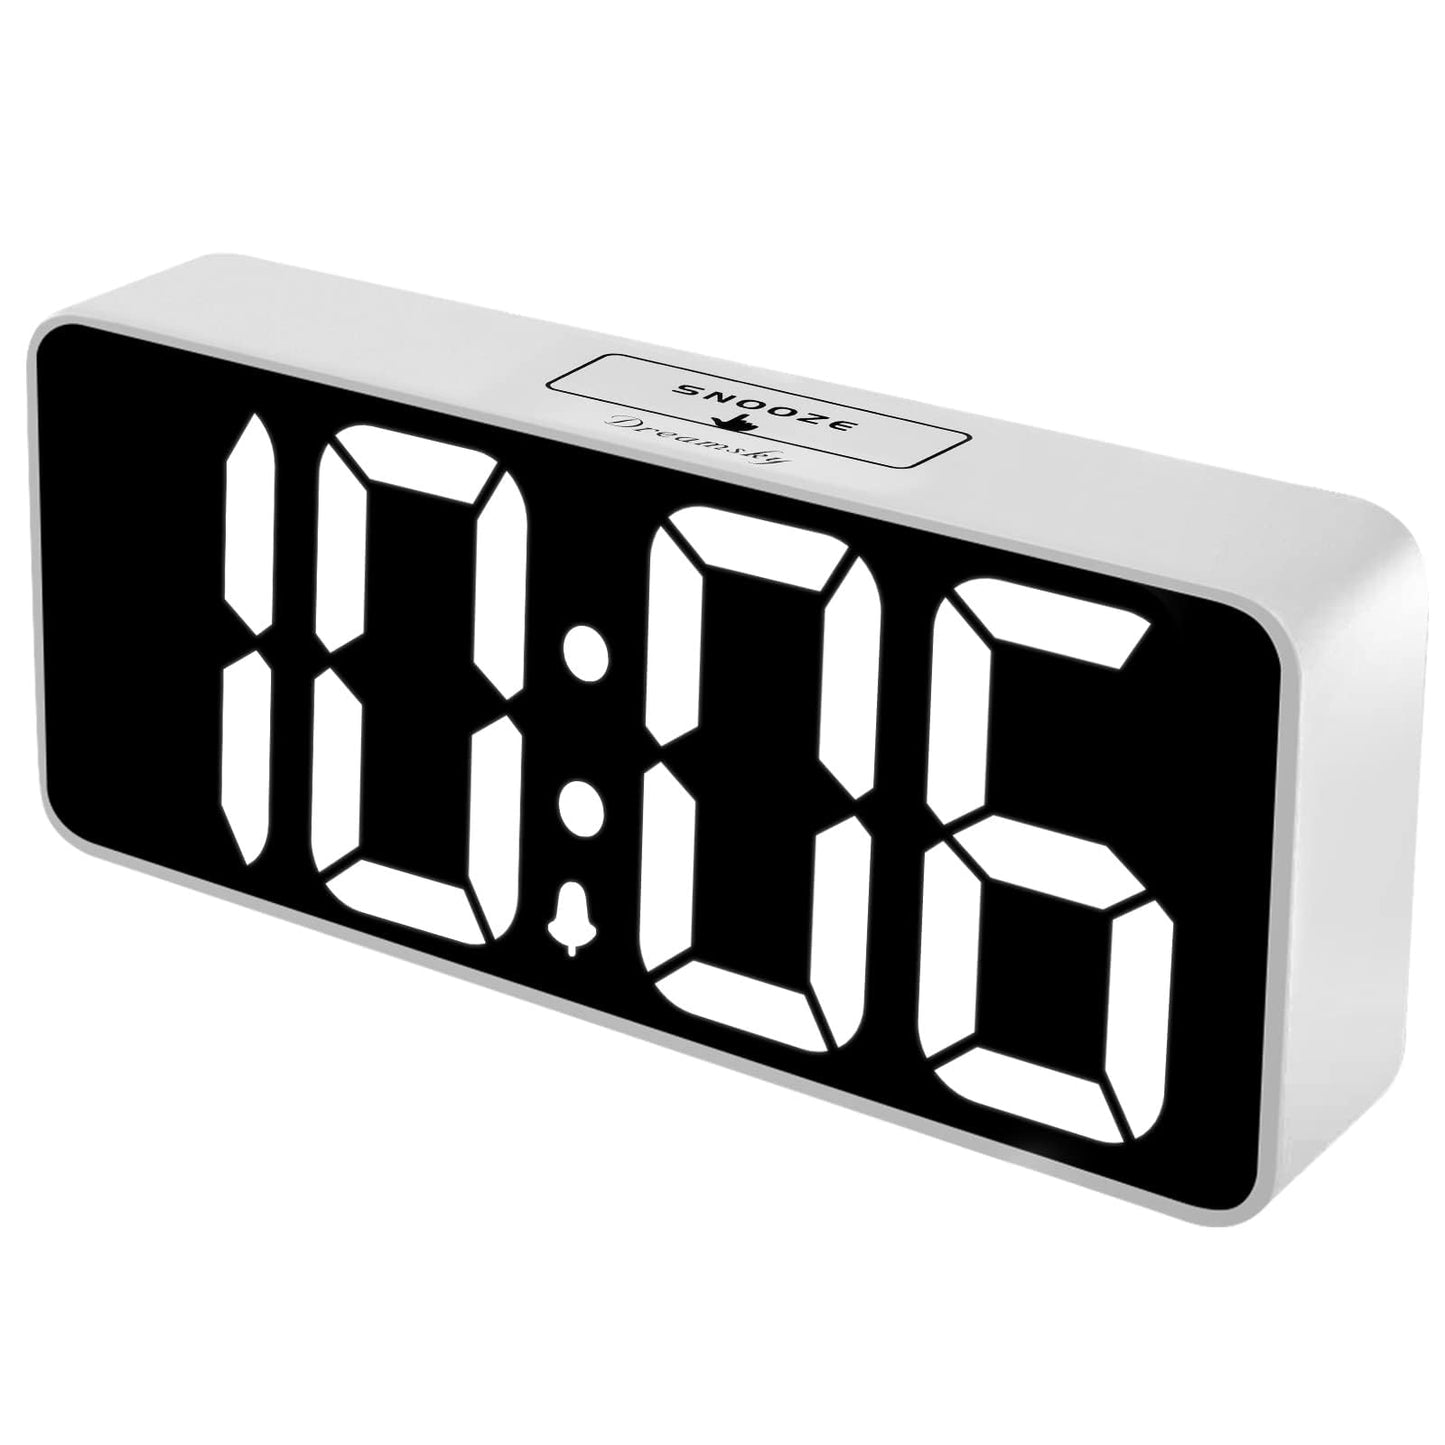 reamSky Large Digital Alarm Clock Big Numbers for Seniors & Visually Impaired, 9 Inches Electric Clocks for Bedroom, Jumbo Display Fully Dimmable Brightness, USB Ports, Adjustable Alarm Volume